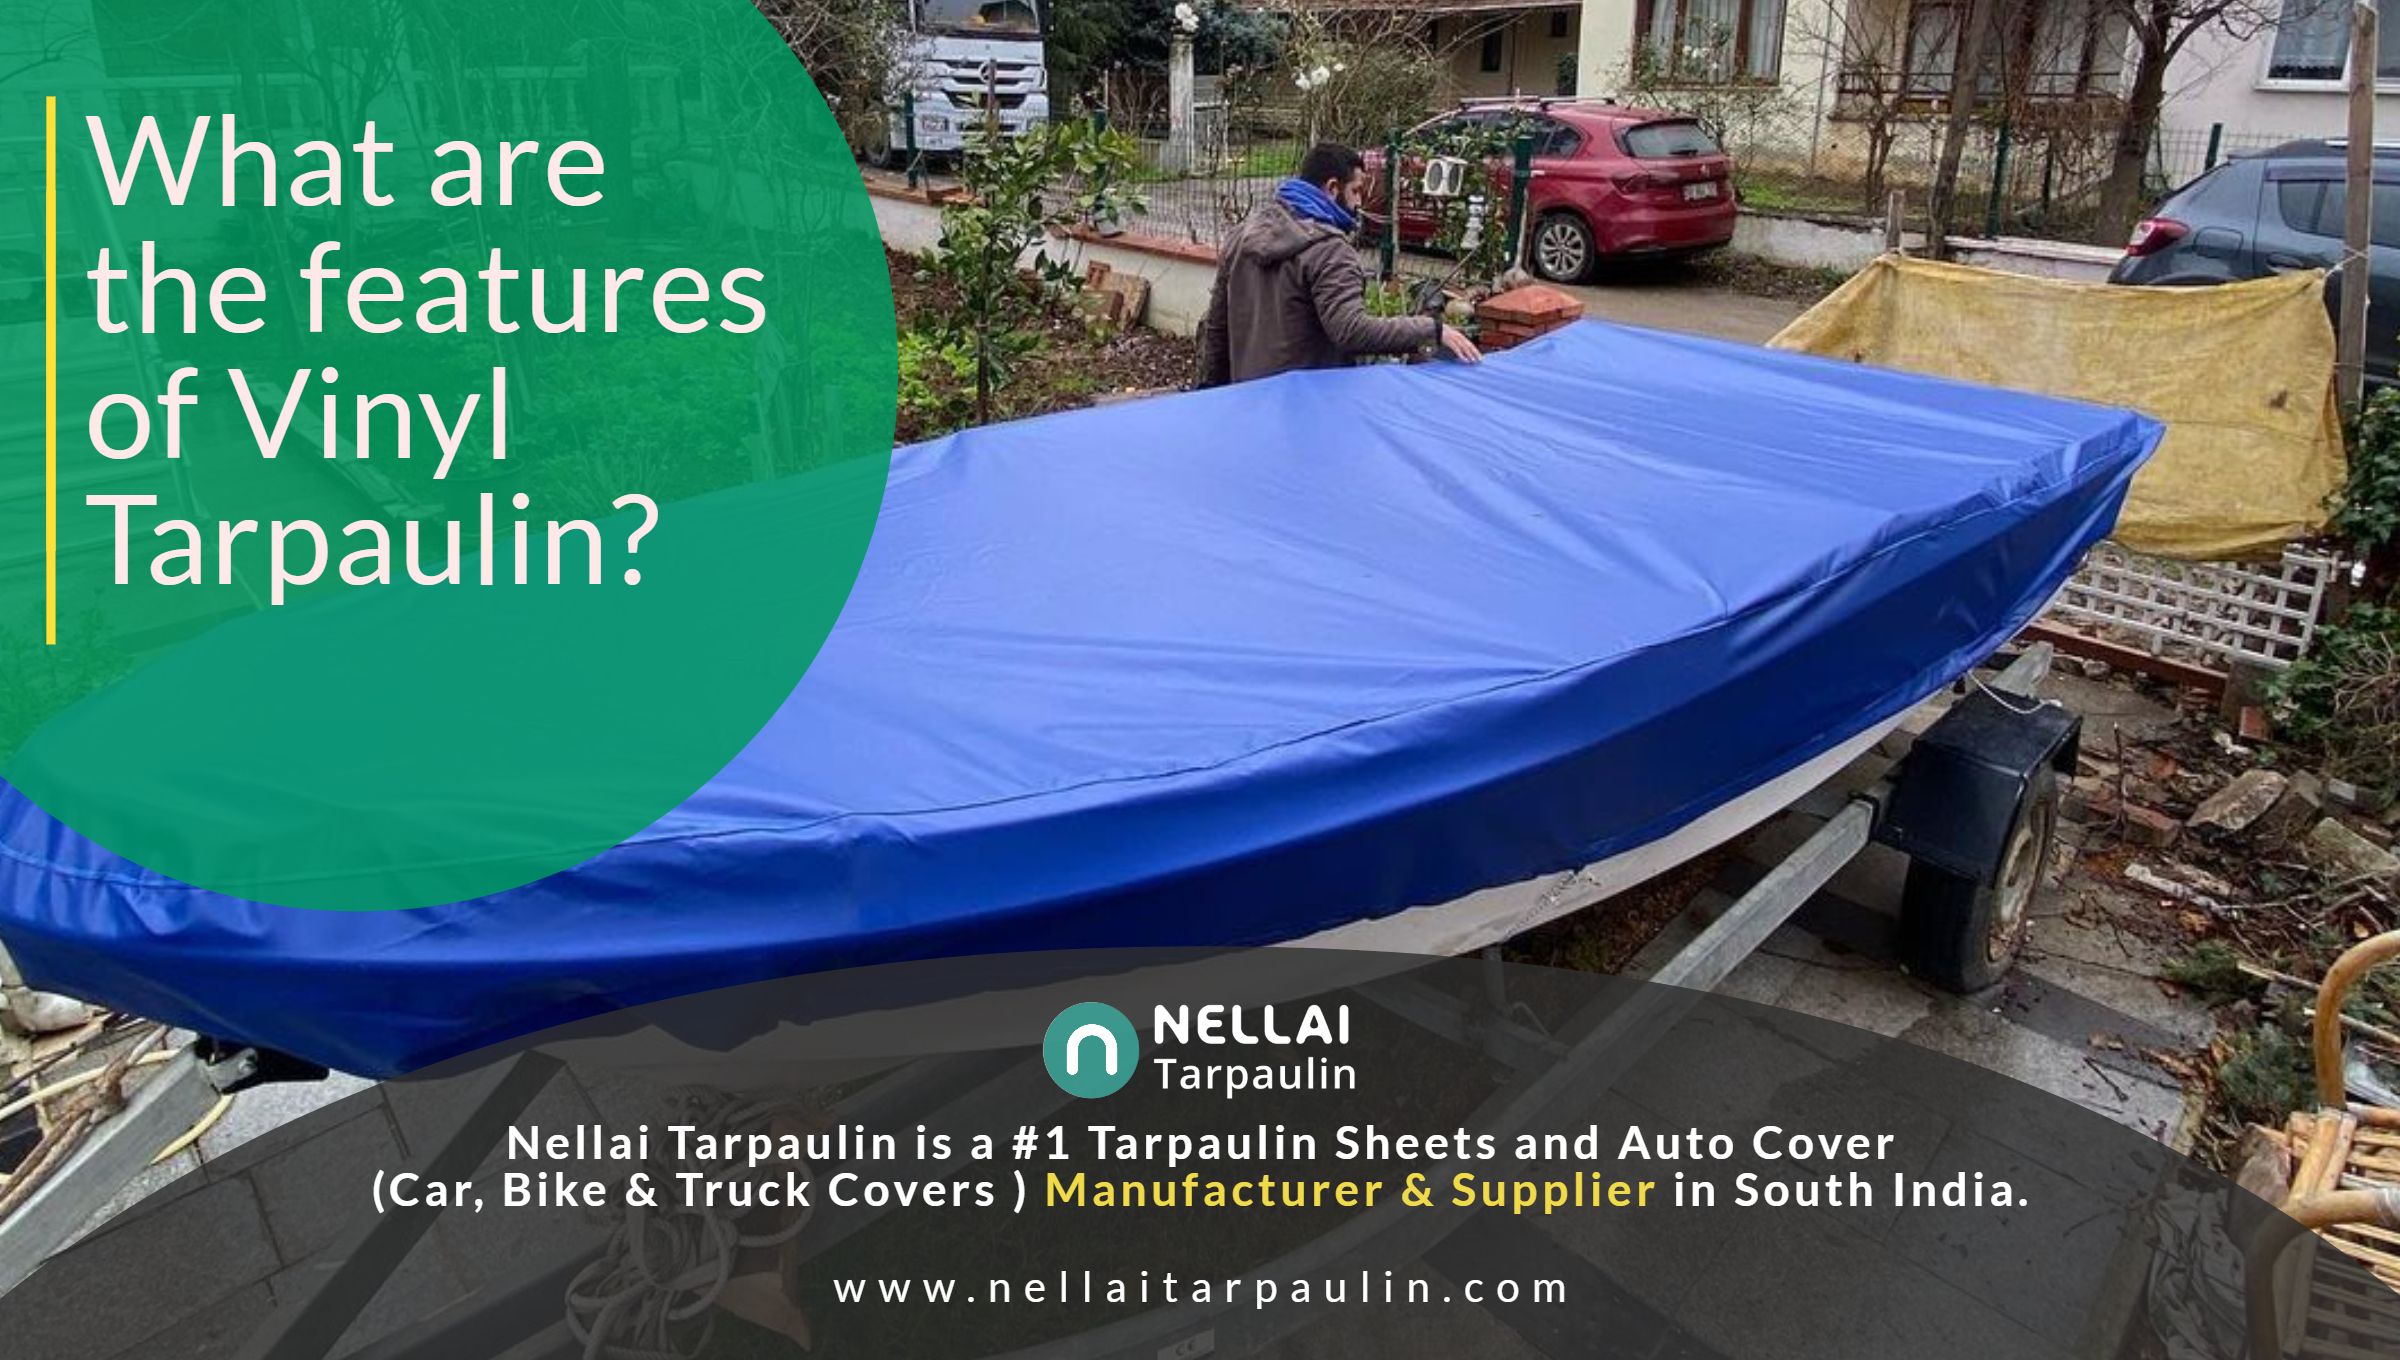 What are the features of Vinyl Tarpaulin?